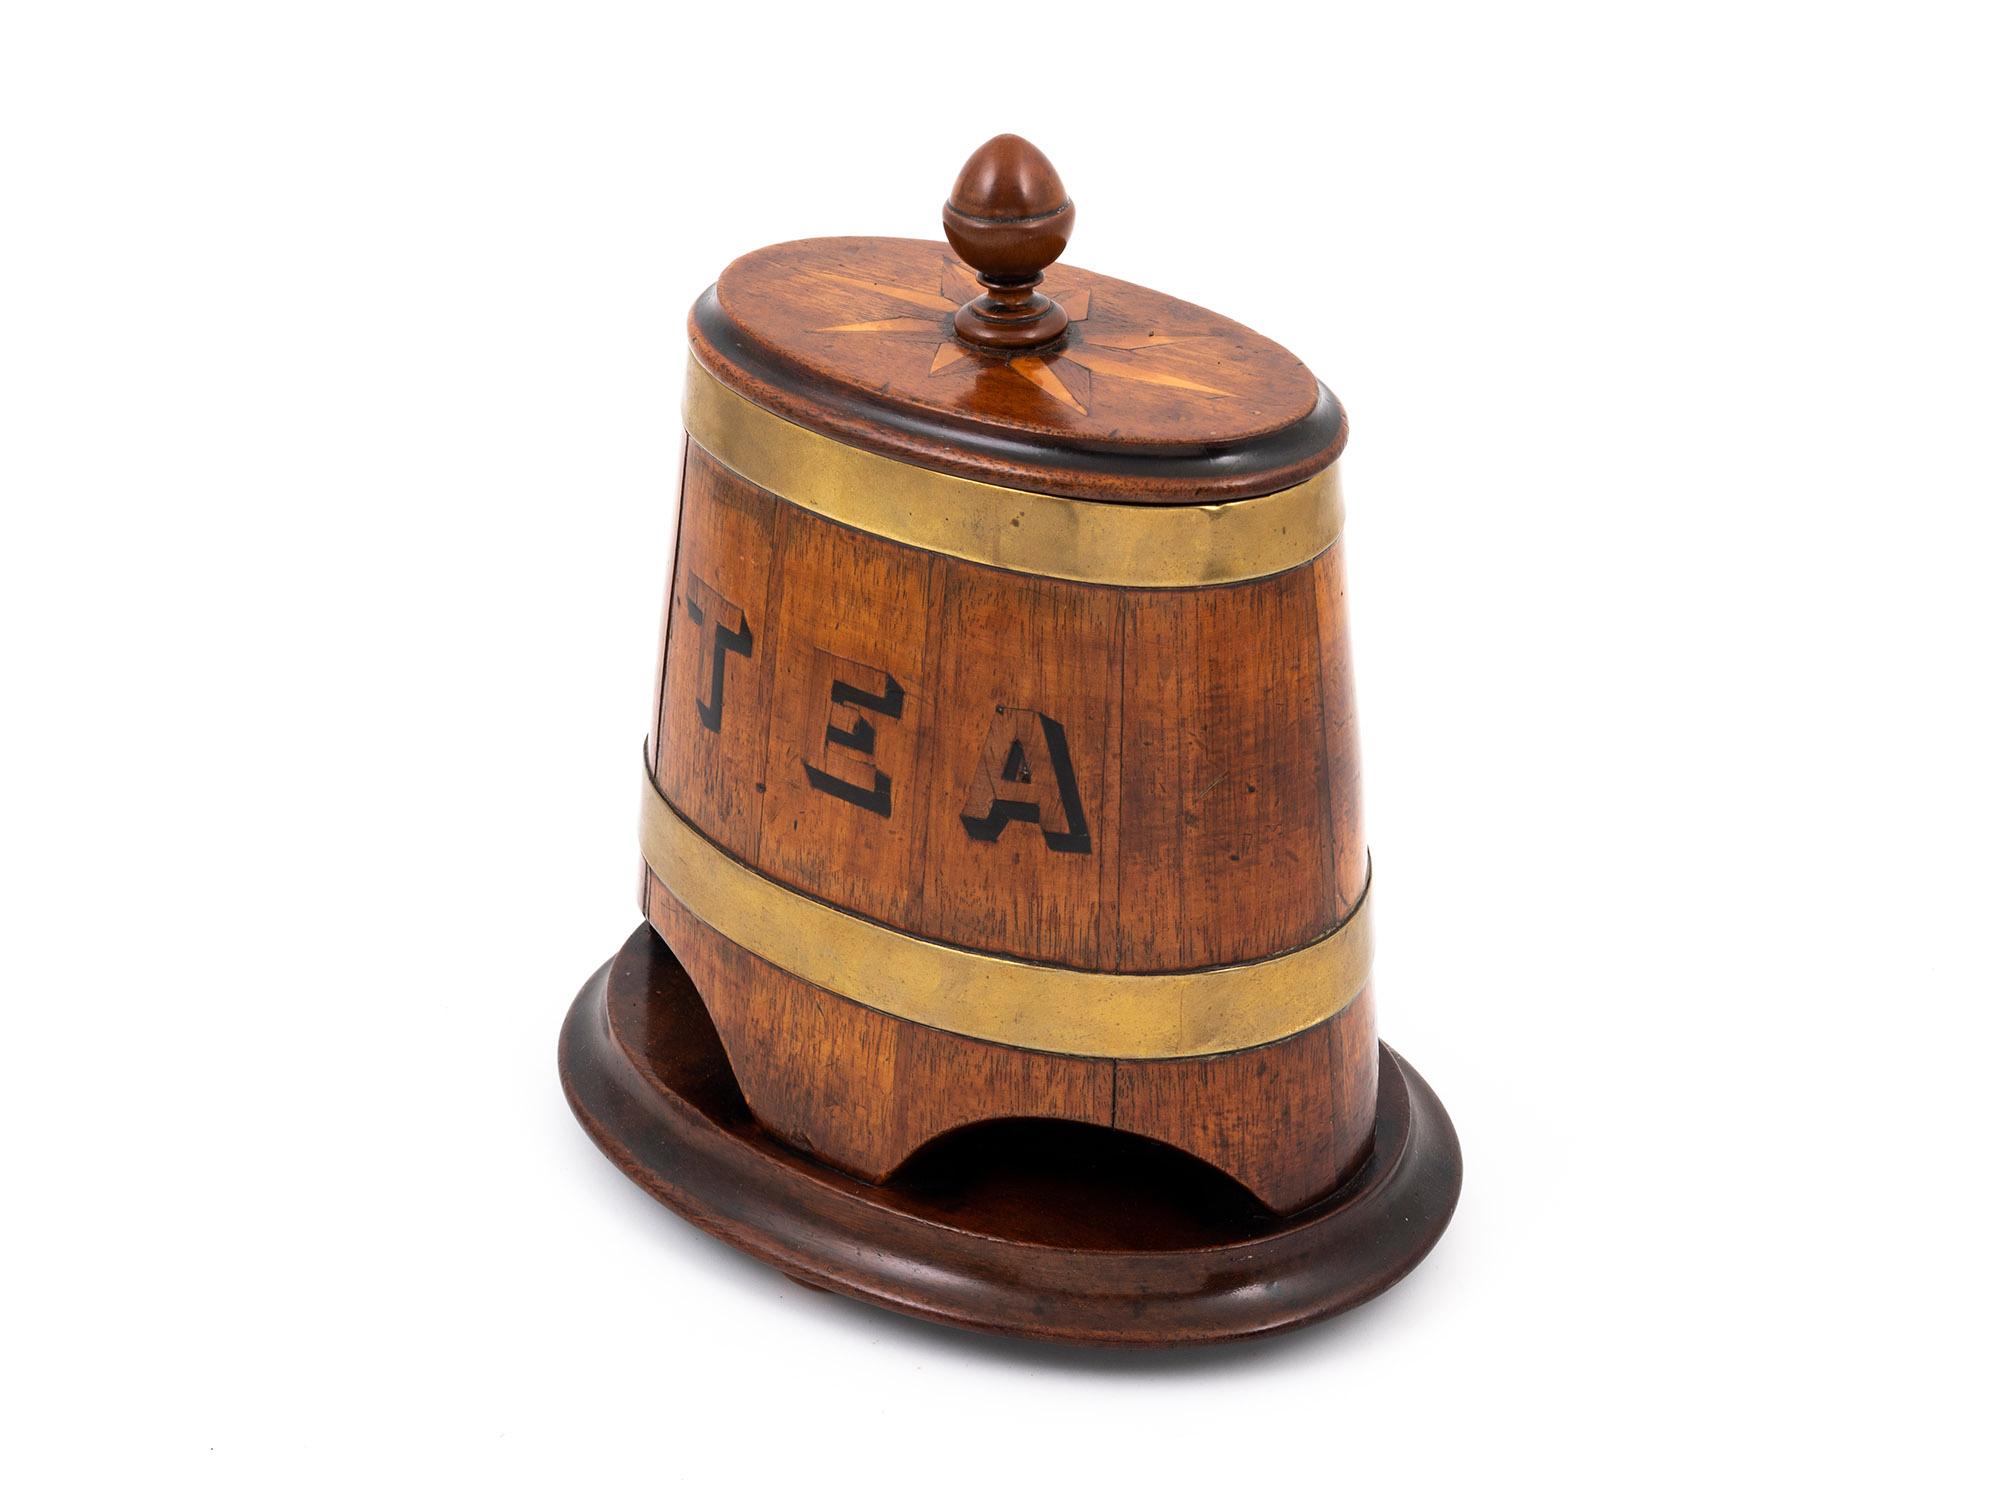 Hand-Carved Coopered Barrel Advertising Tea Caddy For Sale